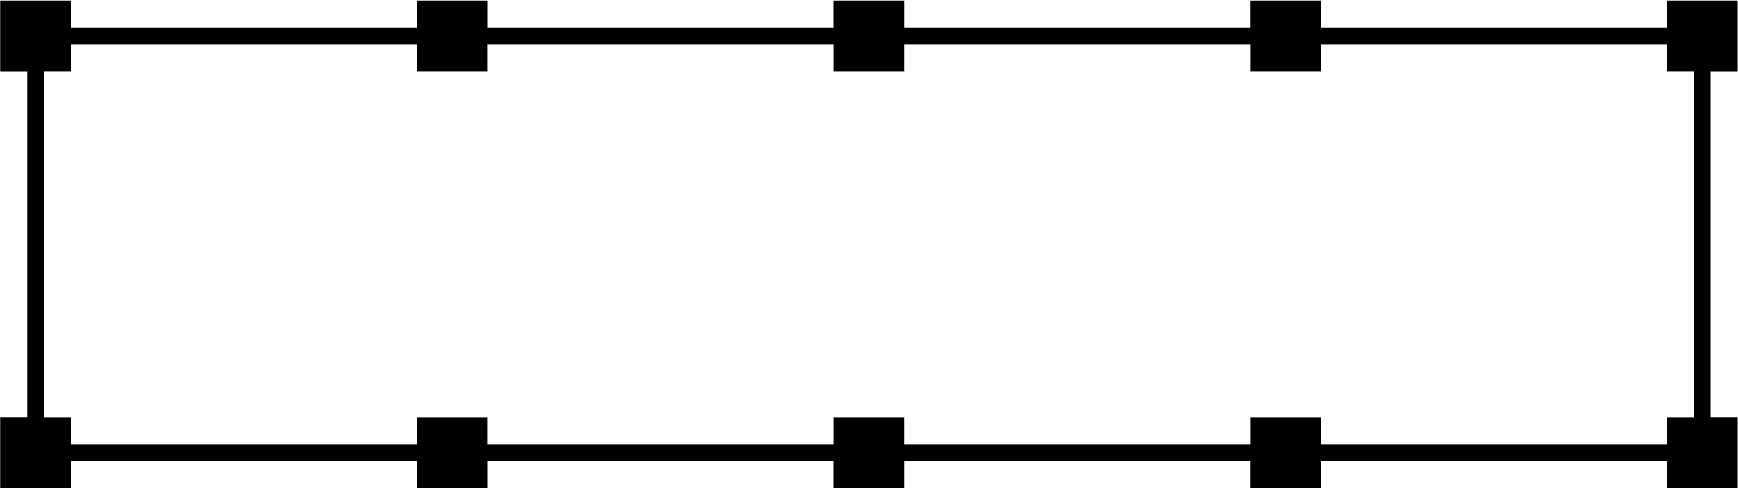 A rectangle with 10 equally spaced points marked around its perimeter with 1 point in each of the four corners. Three points on each of the longer sides divide these sides into four equal segments.